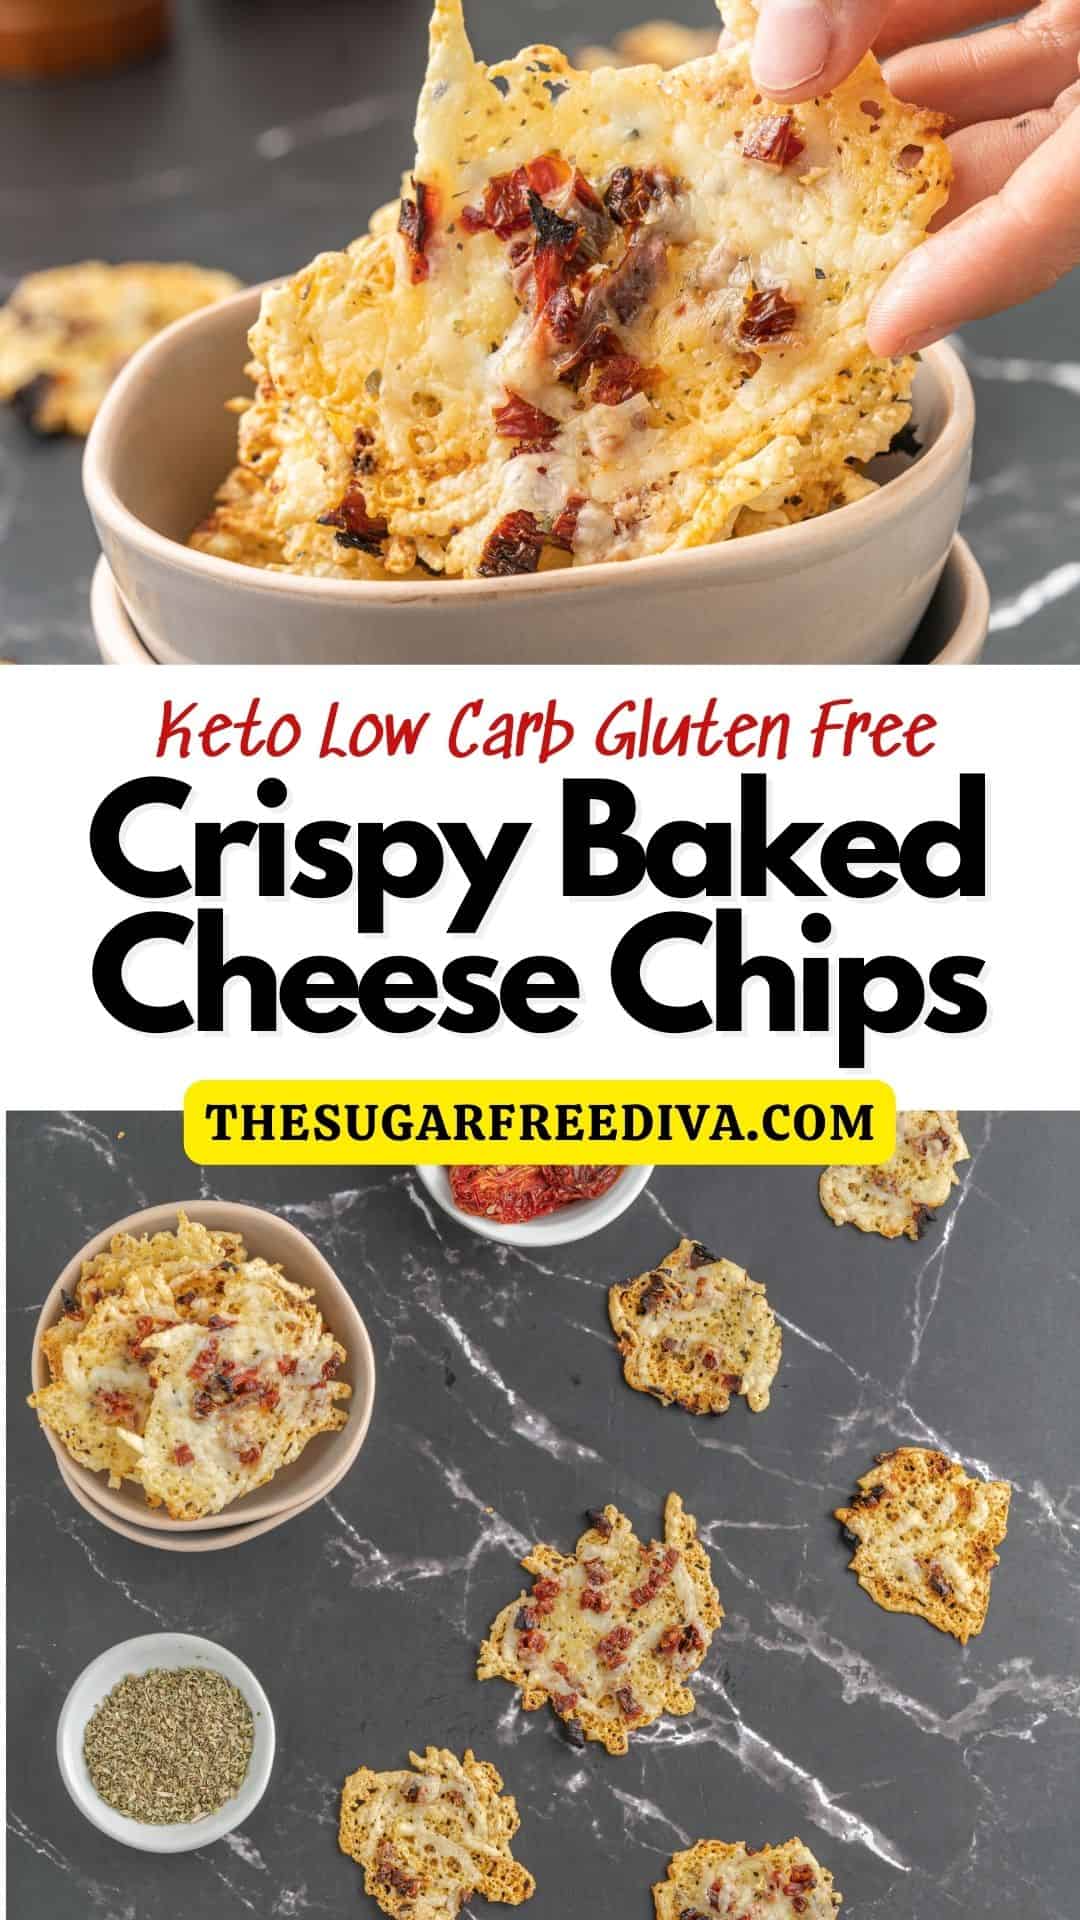 Crispy Baked Cheese Chips, a simple low carb, keto, and gluten free diet snack recipe made with two ingredients and seasonings.